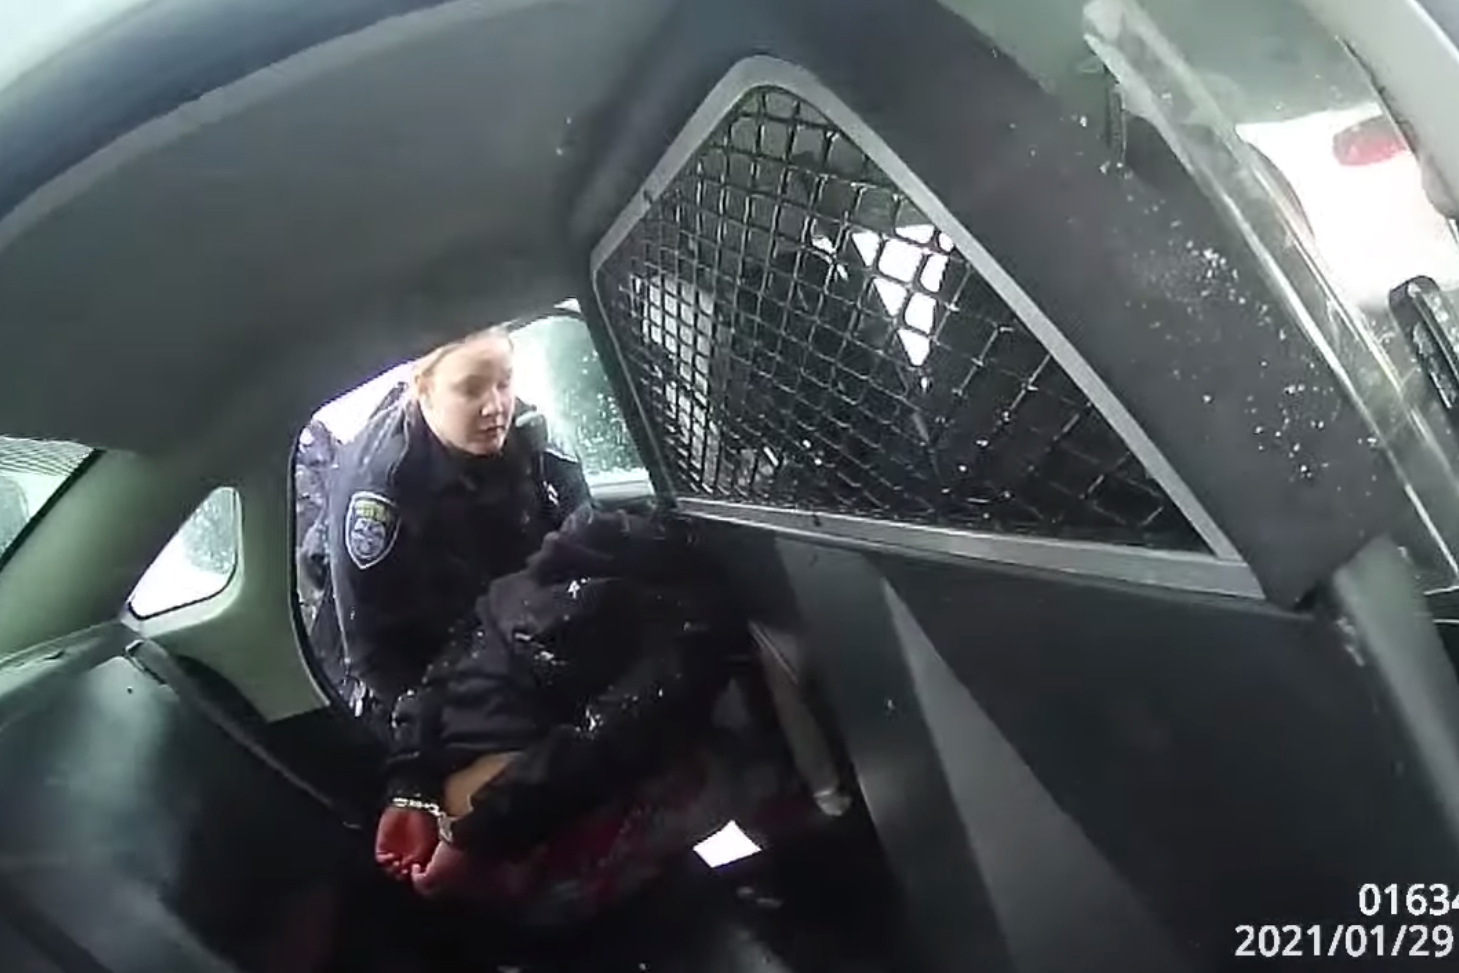 Rochester police pepper sprayed a 9-year-old girl while she was handcuffed in the back of a patrol vehicle on Jan. 29, 2021.